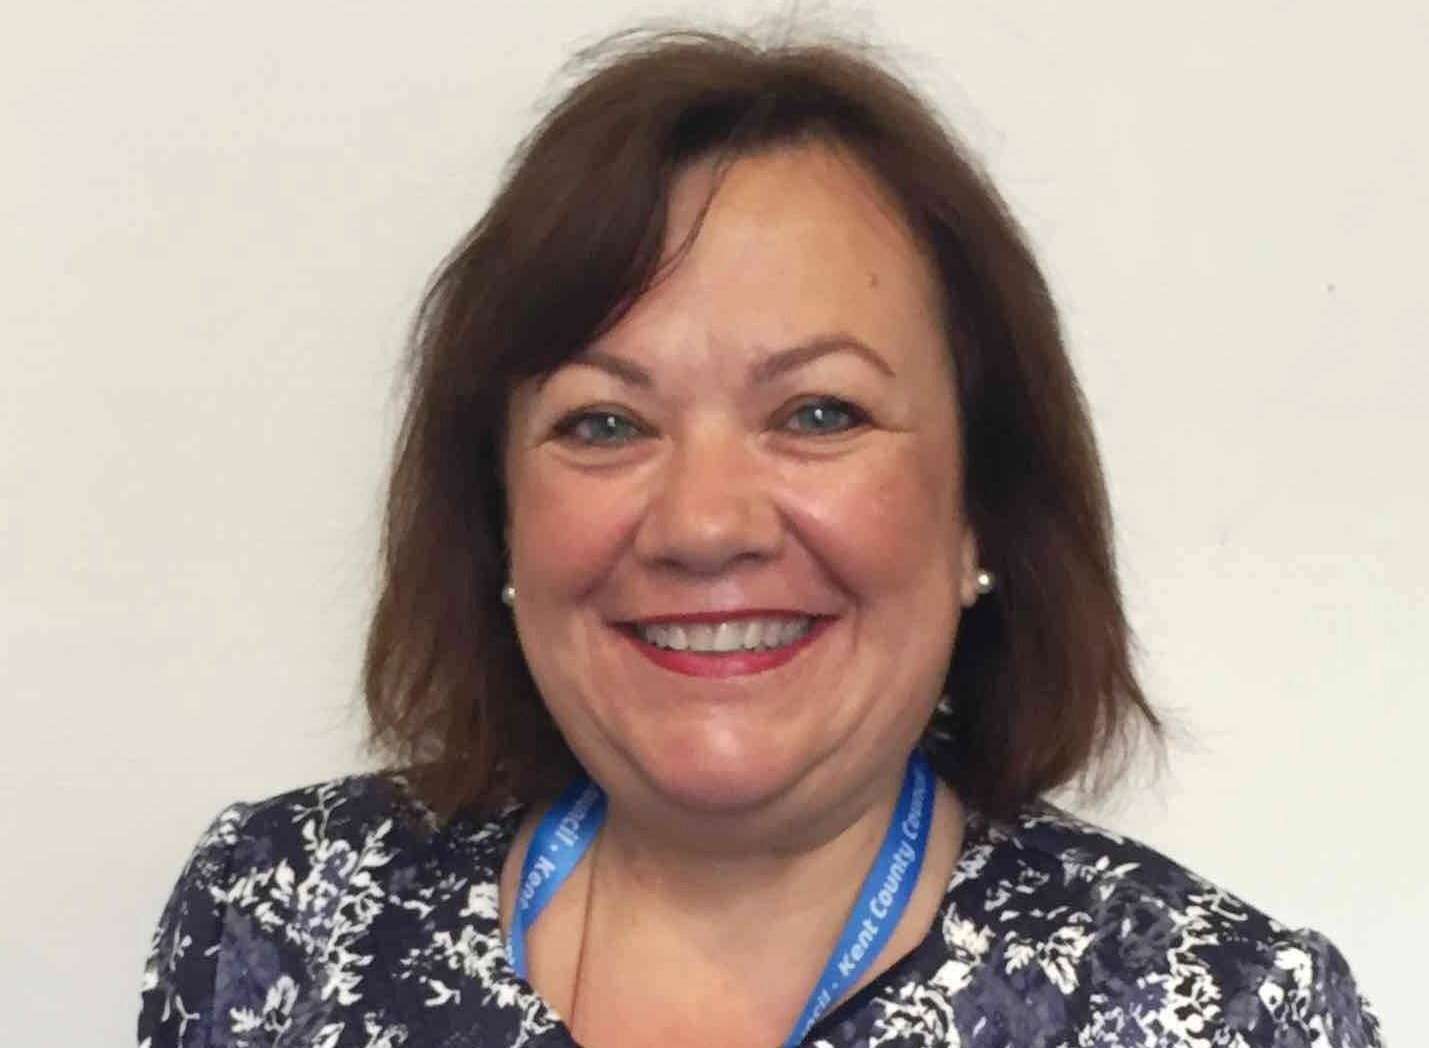 Diane Marsh won the Kent County Council by-election for the Gravesham East Division.